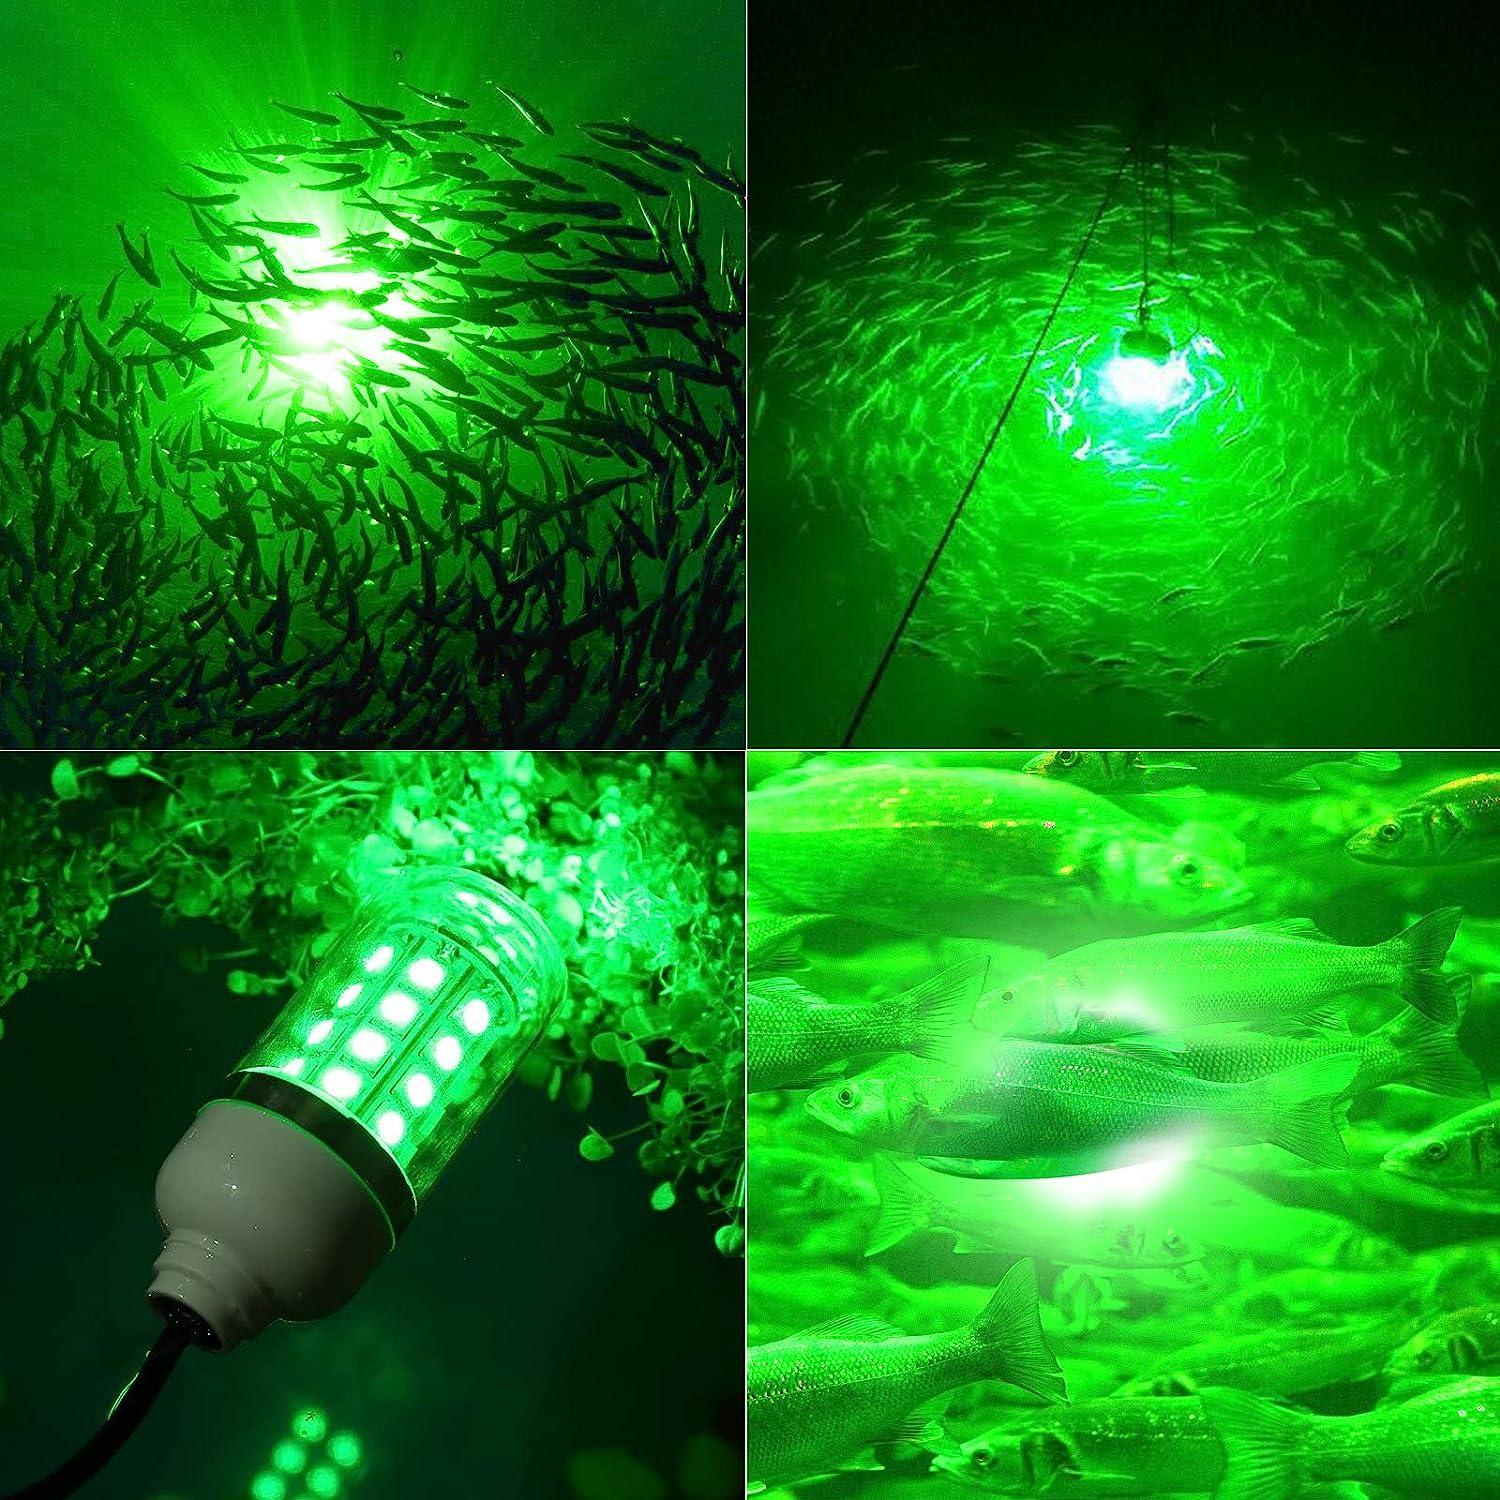 12V 10W/45W LED Submersible Fishing Light, Underwater Night Fishing Finder  Lamp Crappie Lures Bait Squid Shrimp Light, Ice Fishing Light for Boat Dock,  Attractants More Fish in Freshwater & Saltwater